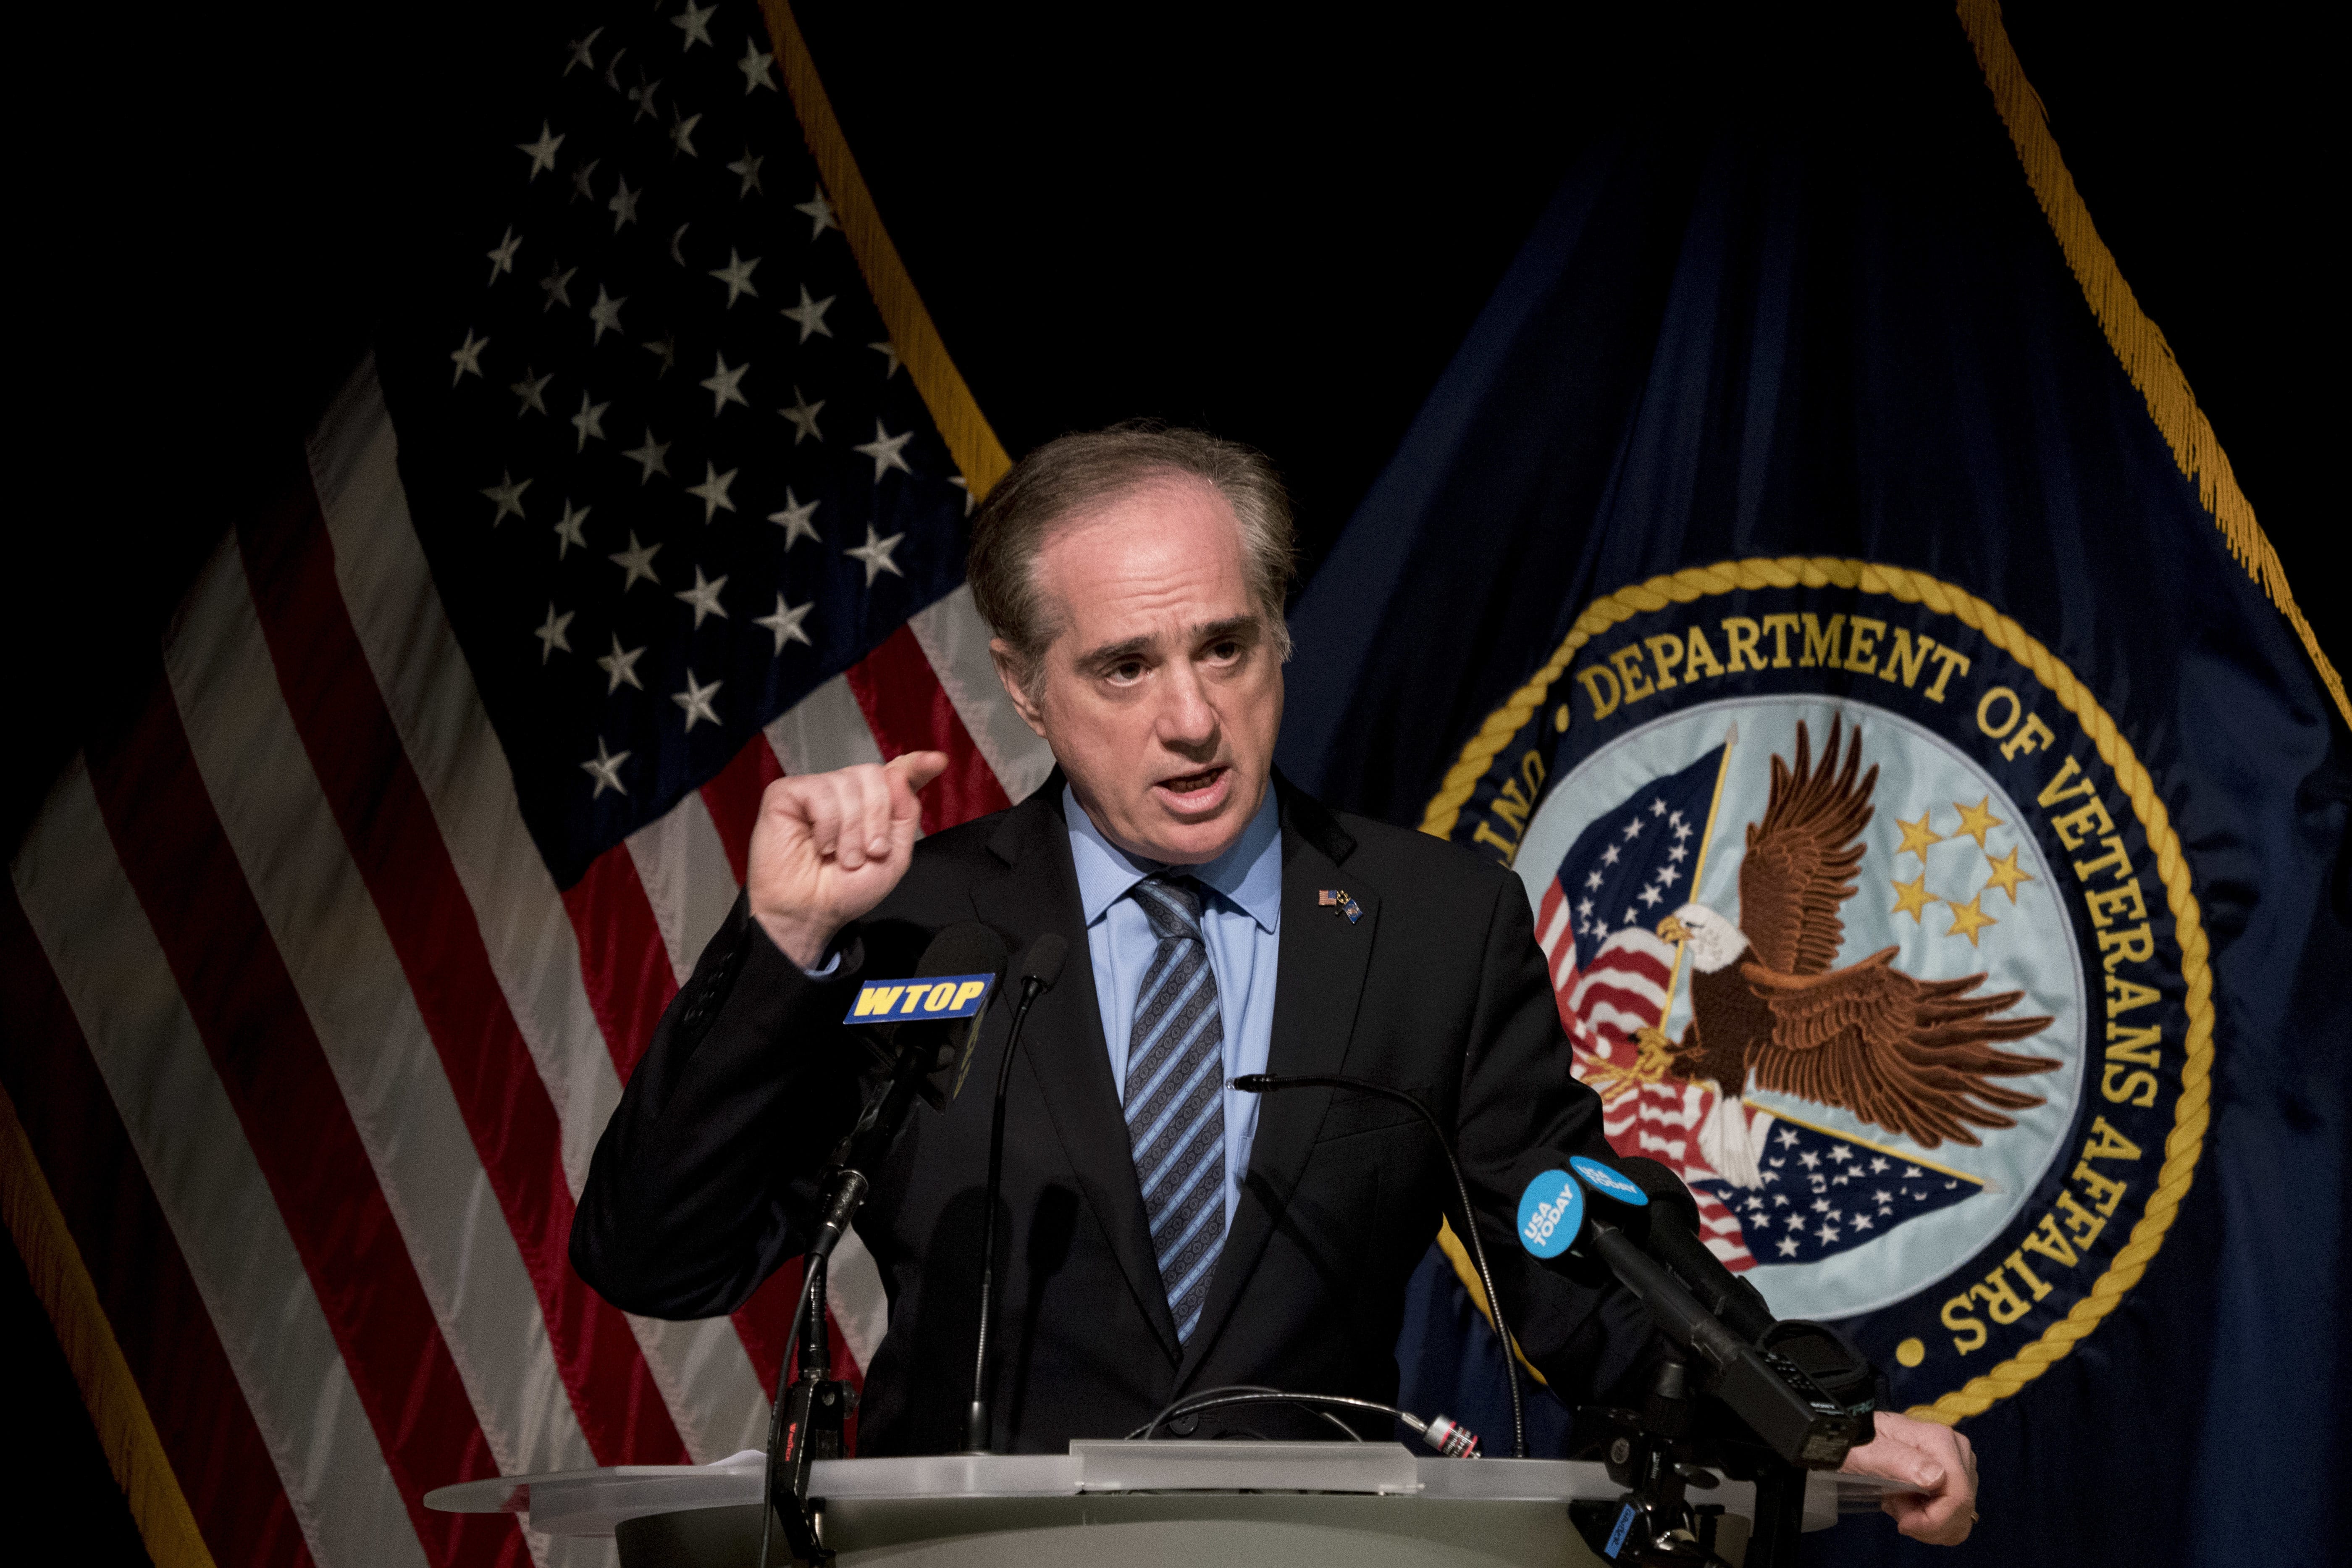 FILE - In this Wednesday, March 7, 2018 file photo, Veterans Affairs Secretary David Shulkin speaks at a news conference in Washington. On Wednesday, March 28, 2018, President Donald Trump fired Shulkin, and tweeted that White House doctor Ronny Jackson is his nominee to be the next Veterans Affairs secretary.